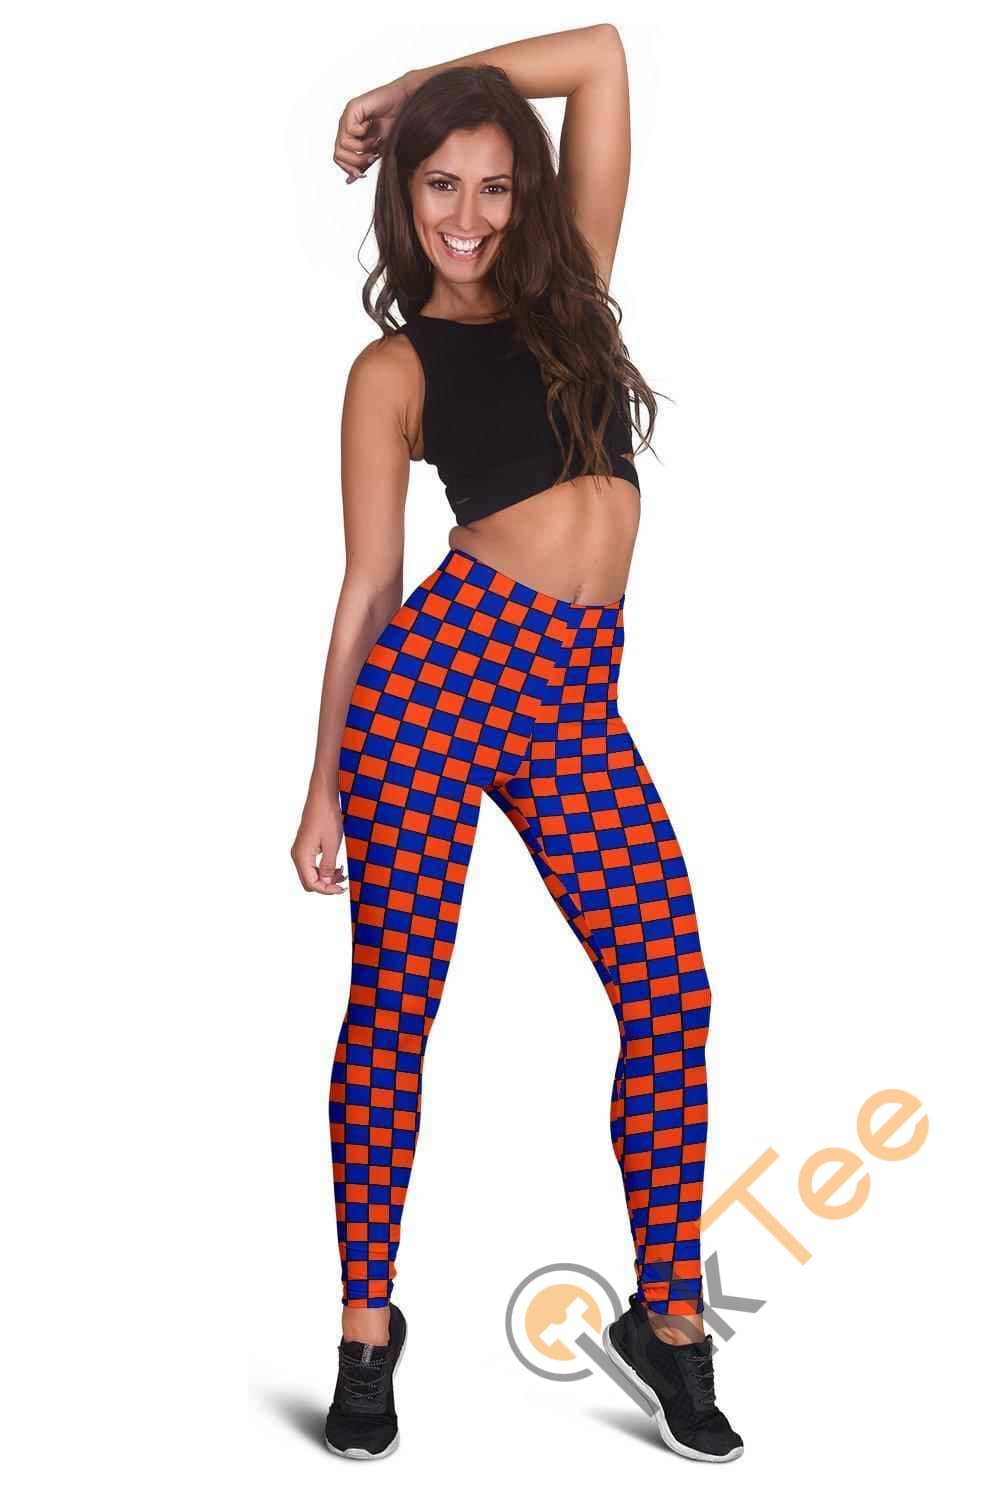 Inktee Store - Florida Gators Fan Inspired 3D All Over Print For Yoga Fitness Checkers Women'S Leggings Image